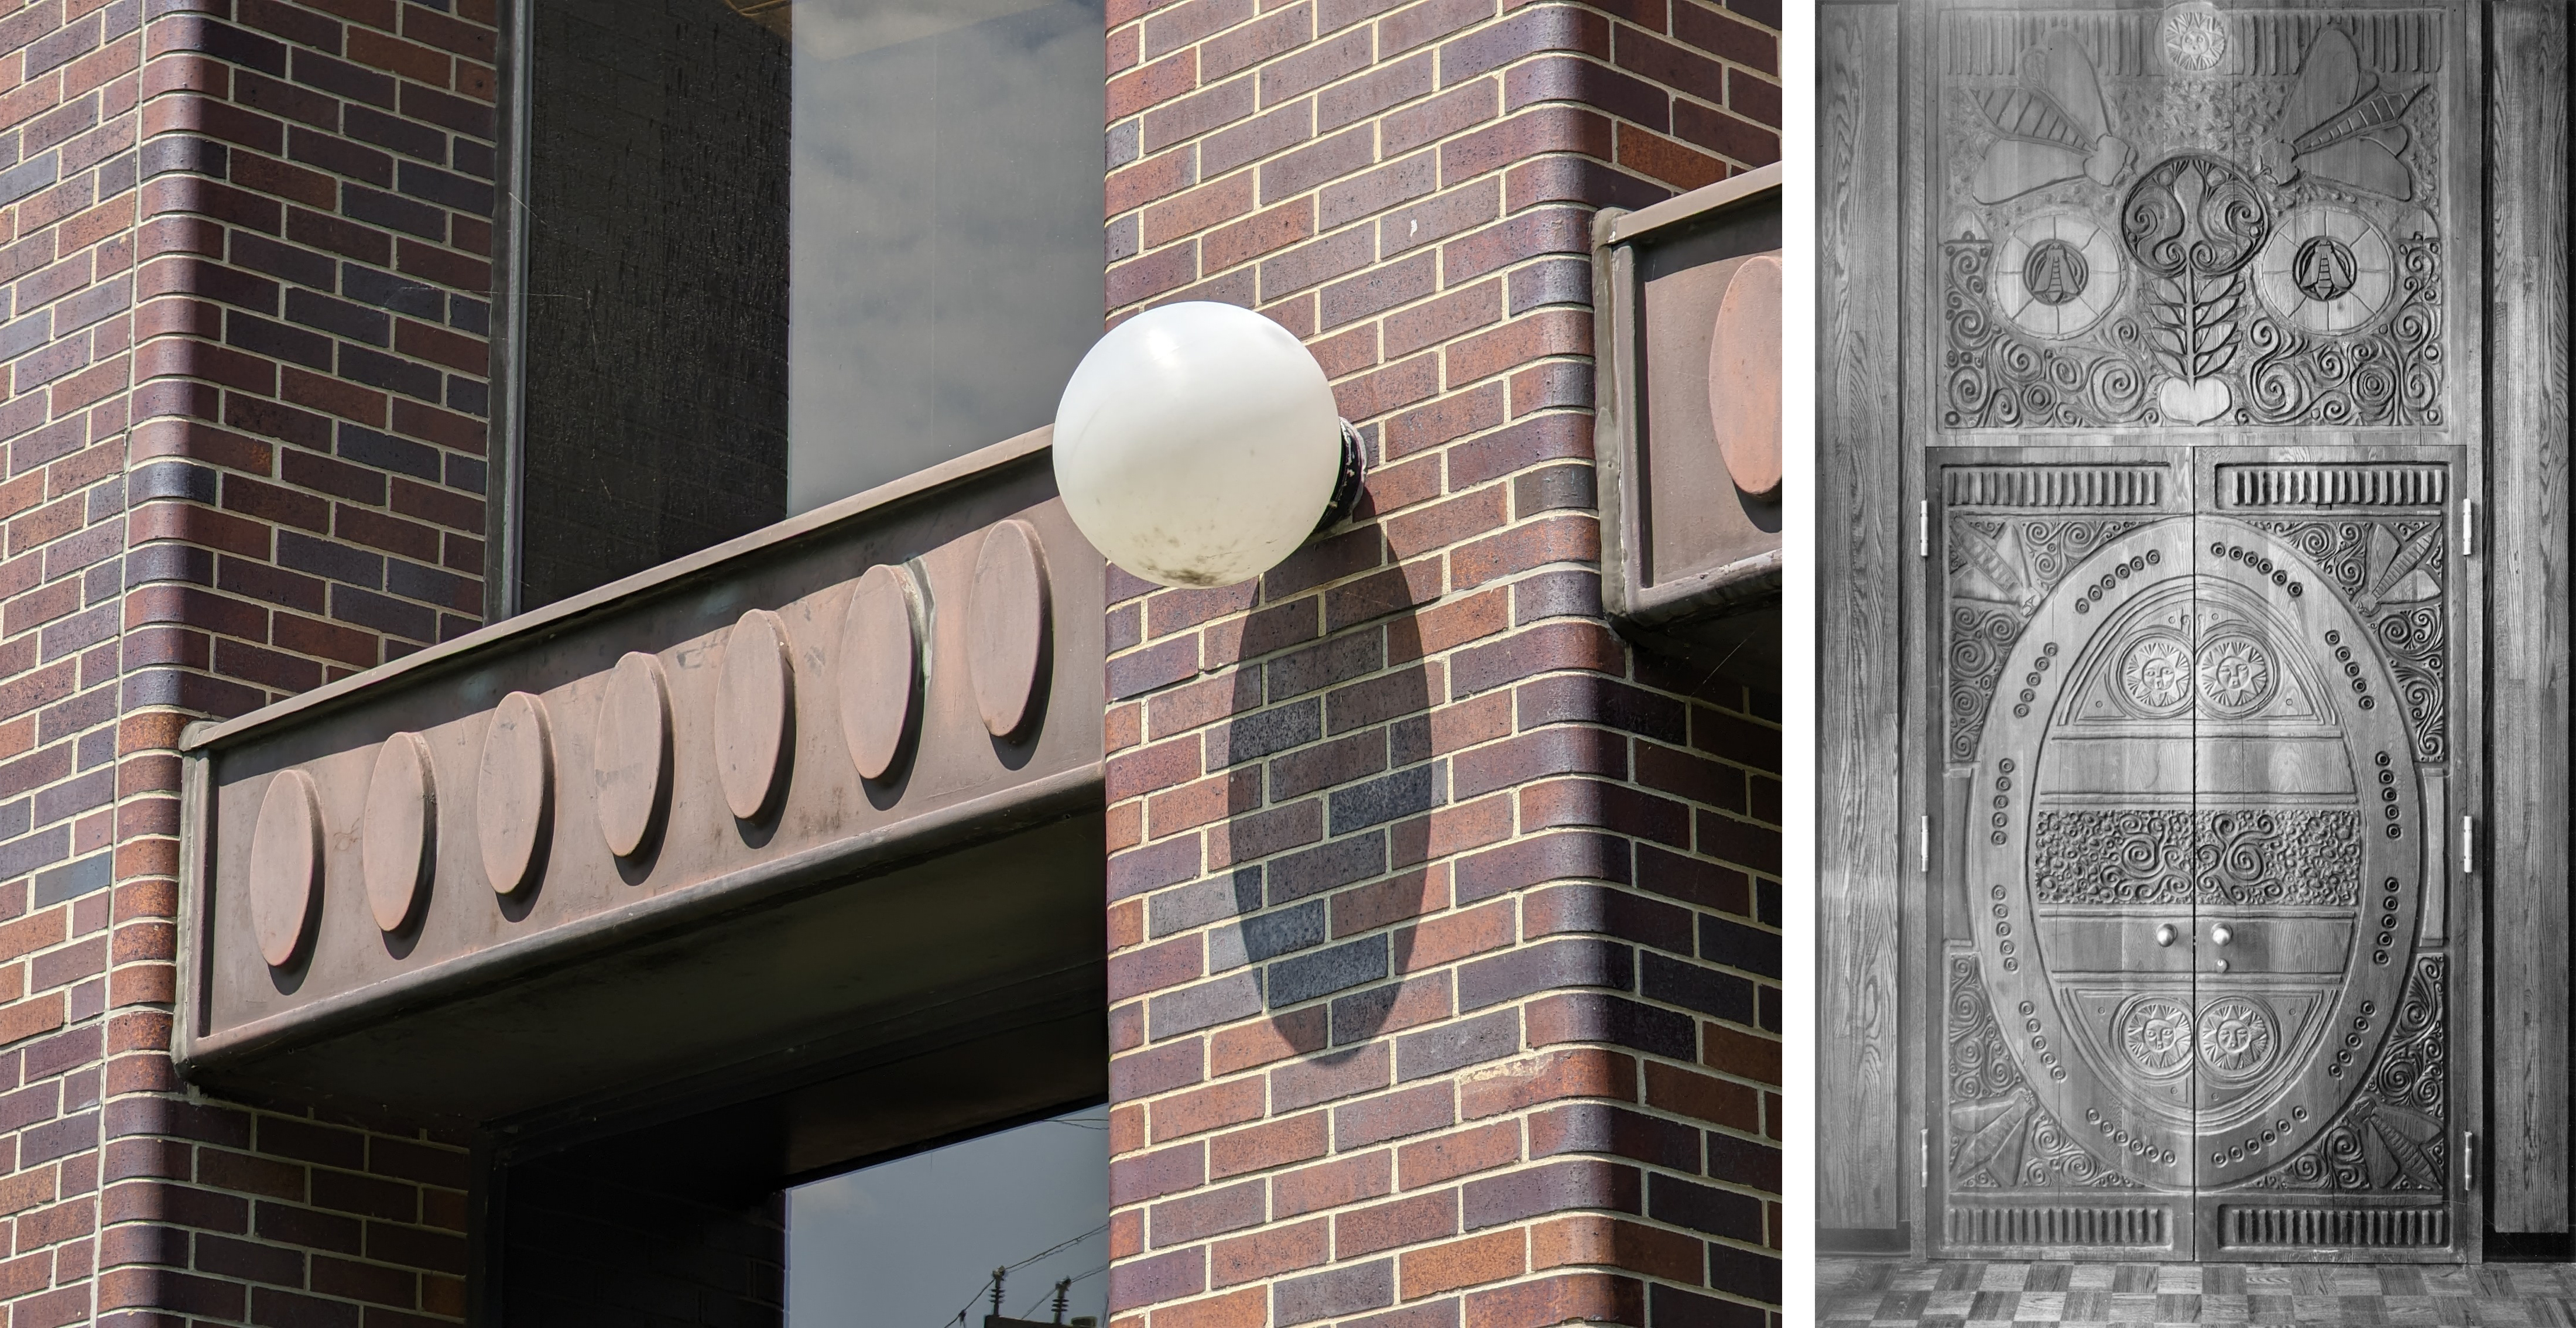 Left: Close-up of building exterior showing rounded brown brick, window spandrels with oval ornament, and a spherical light fixture. Right: Black and white photograph of a large pair of highly detailed carved wood door. The carvings comprise of a large, central oval with decoration and imagery of the sun, plants, swirls, and bees.																			